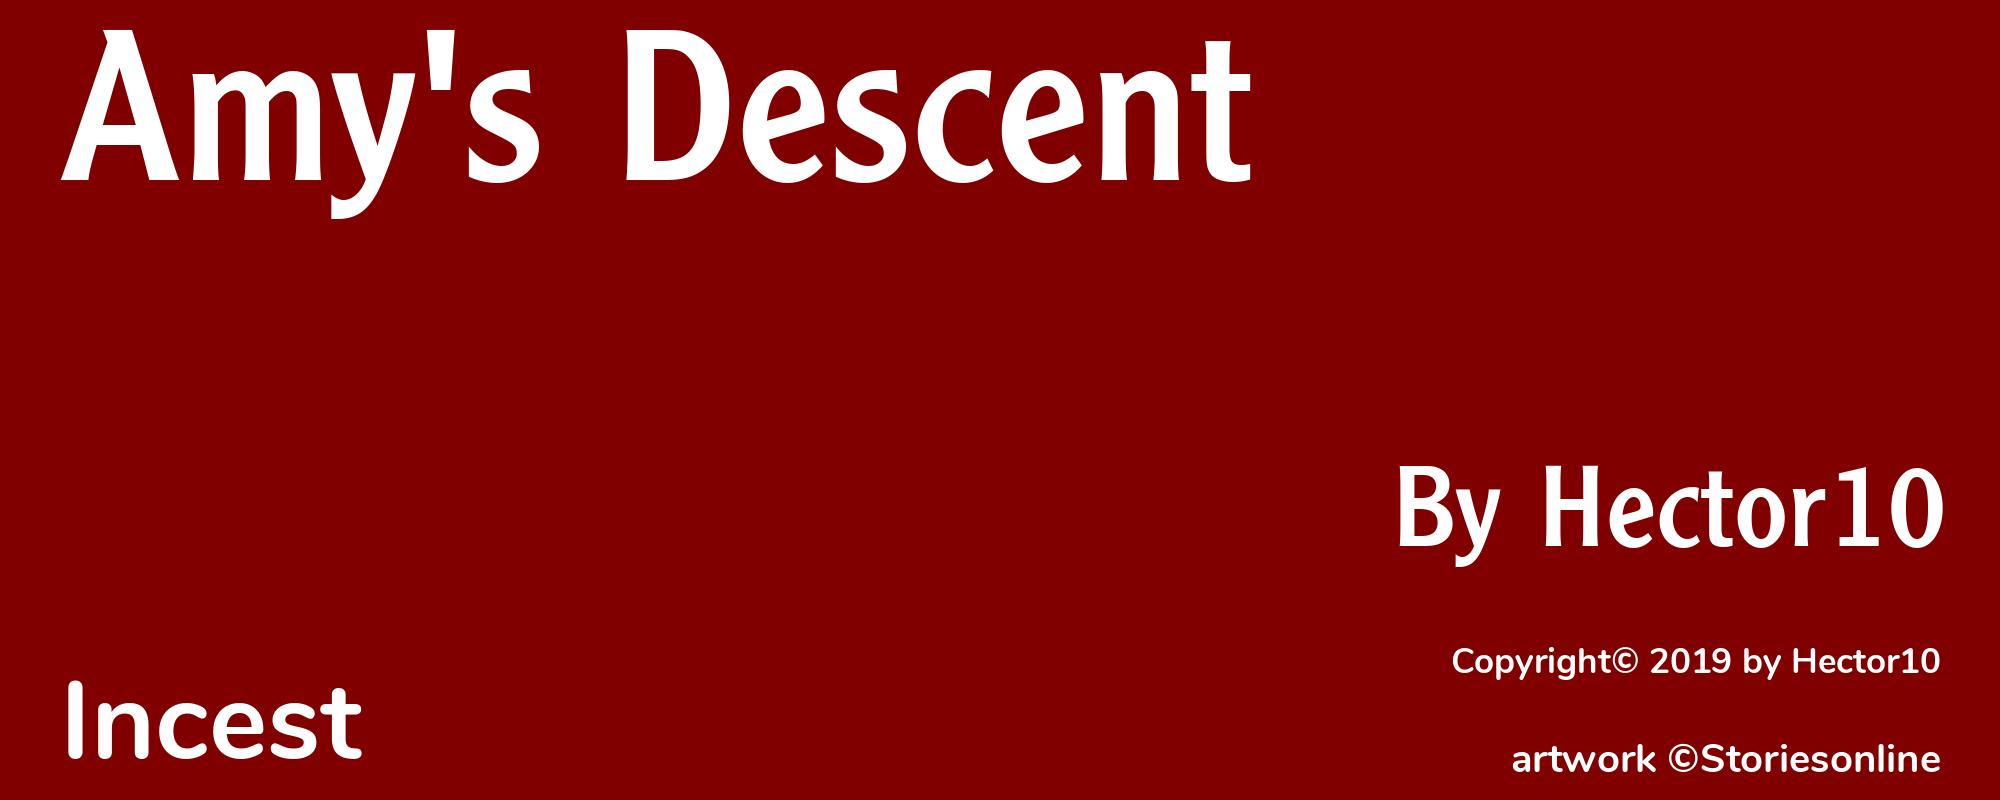 Amy's Descent - Cover